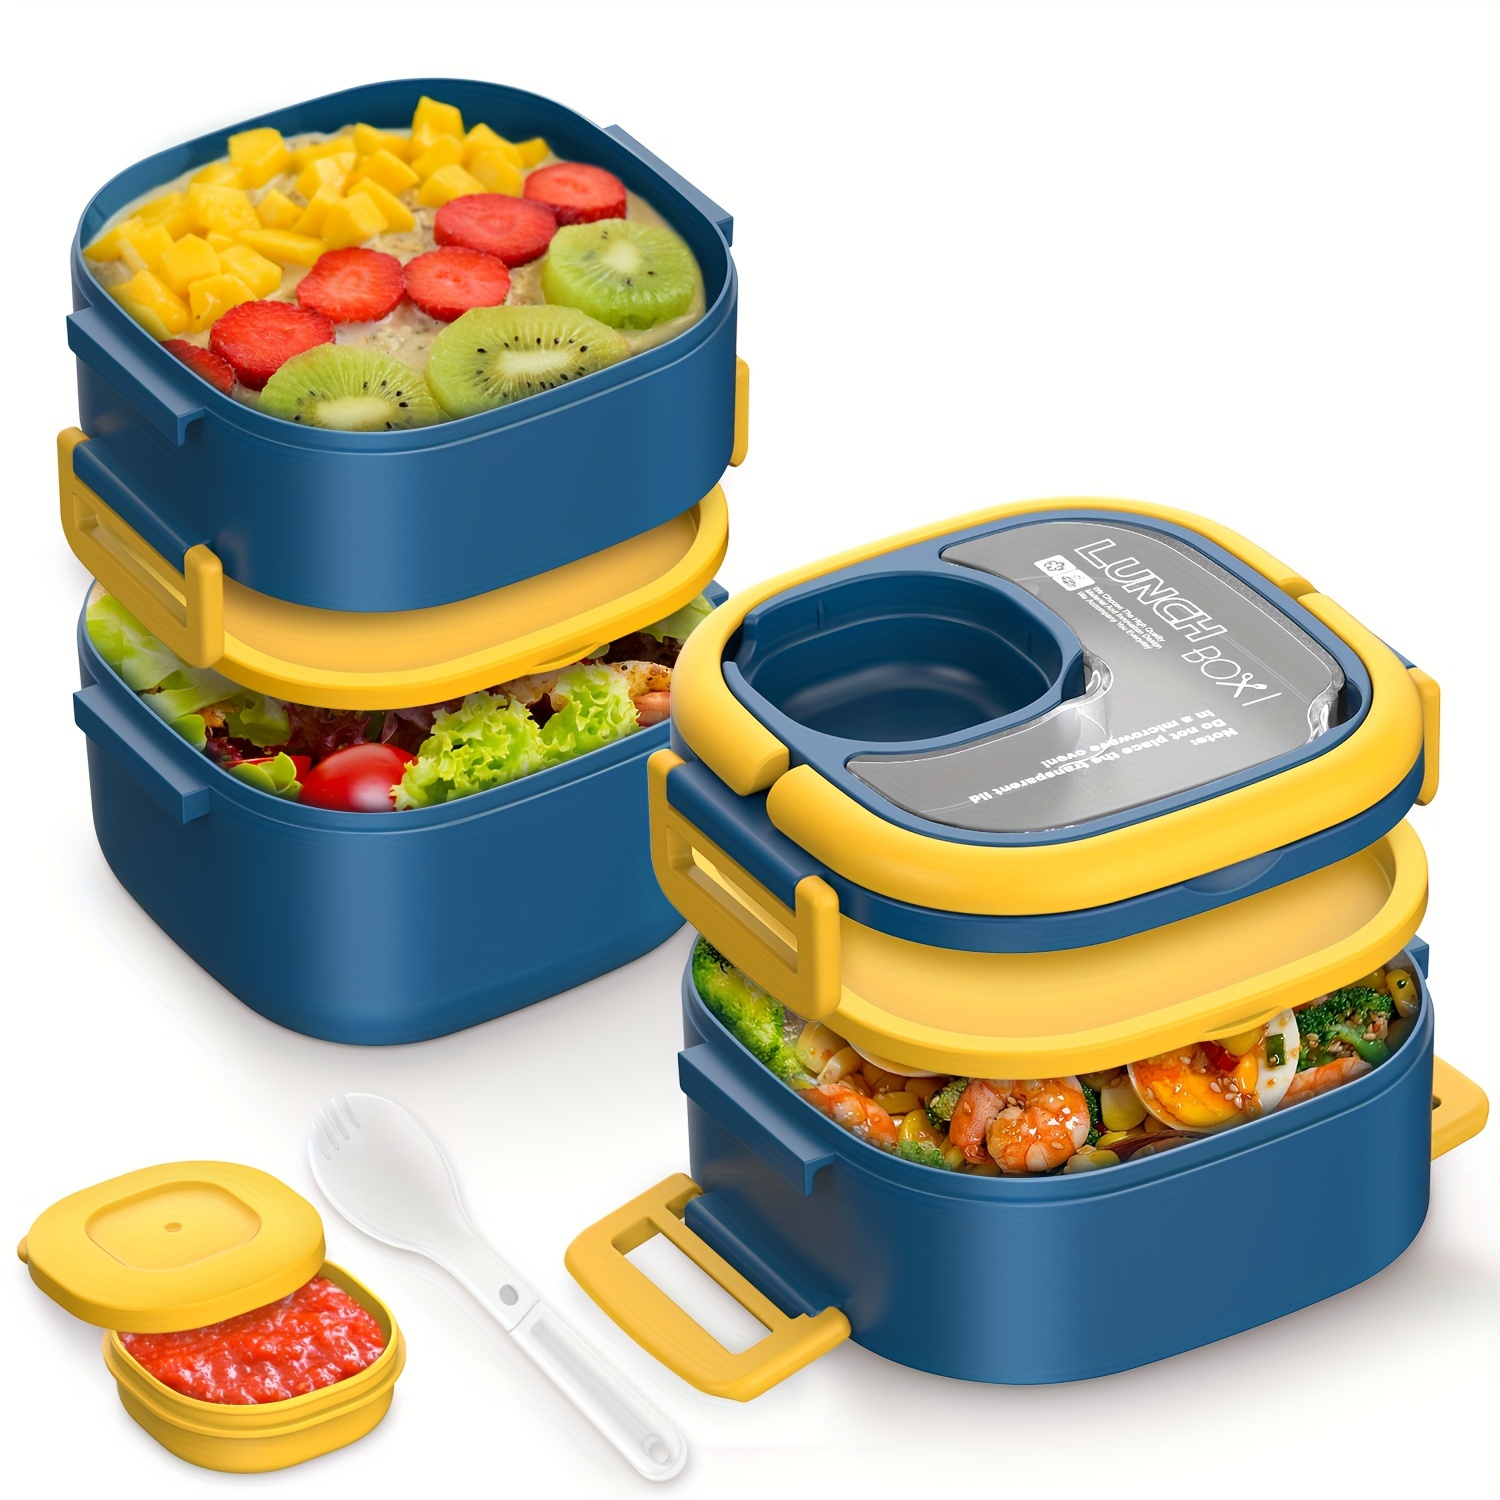 

Bento Box Lunch Box For Kids, 1.84l (62oz) Stackable 3 Layers Leak-proof Lunch Container, Microwave Safe Snack Salad Meal-prep Bento Box For Adults And Kids To School, Work, Camping-blue